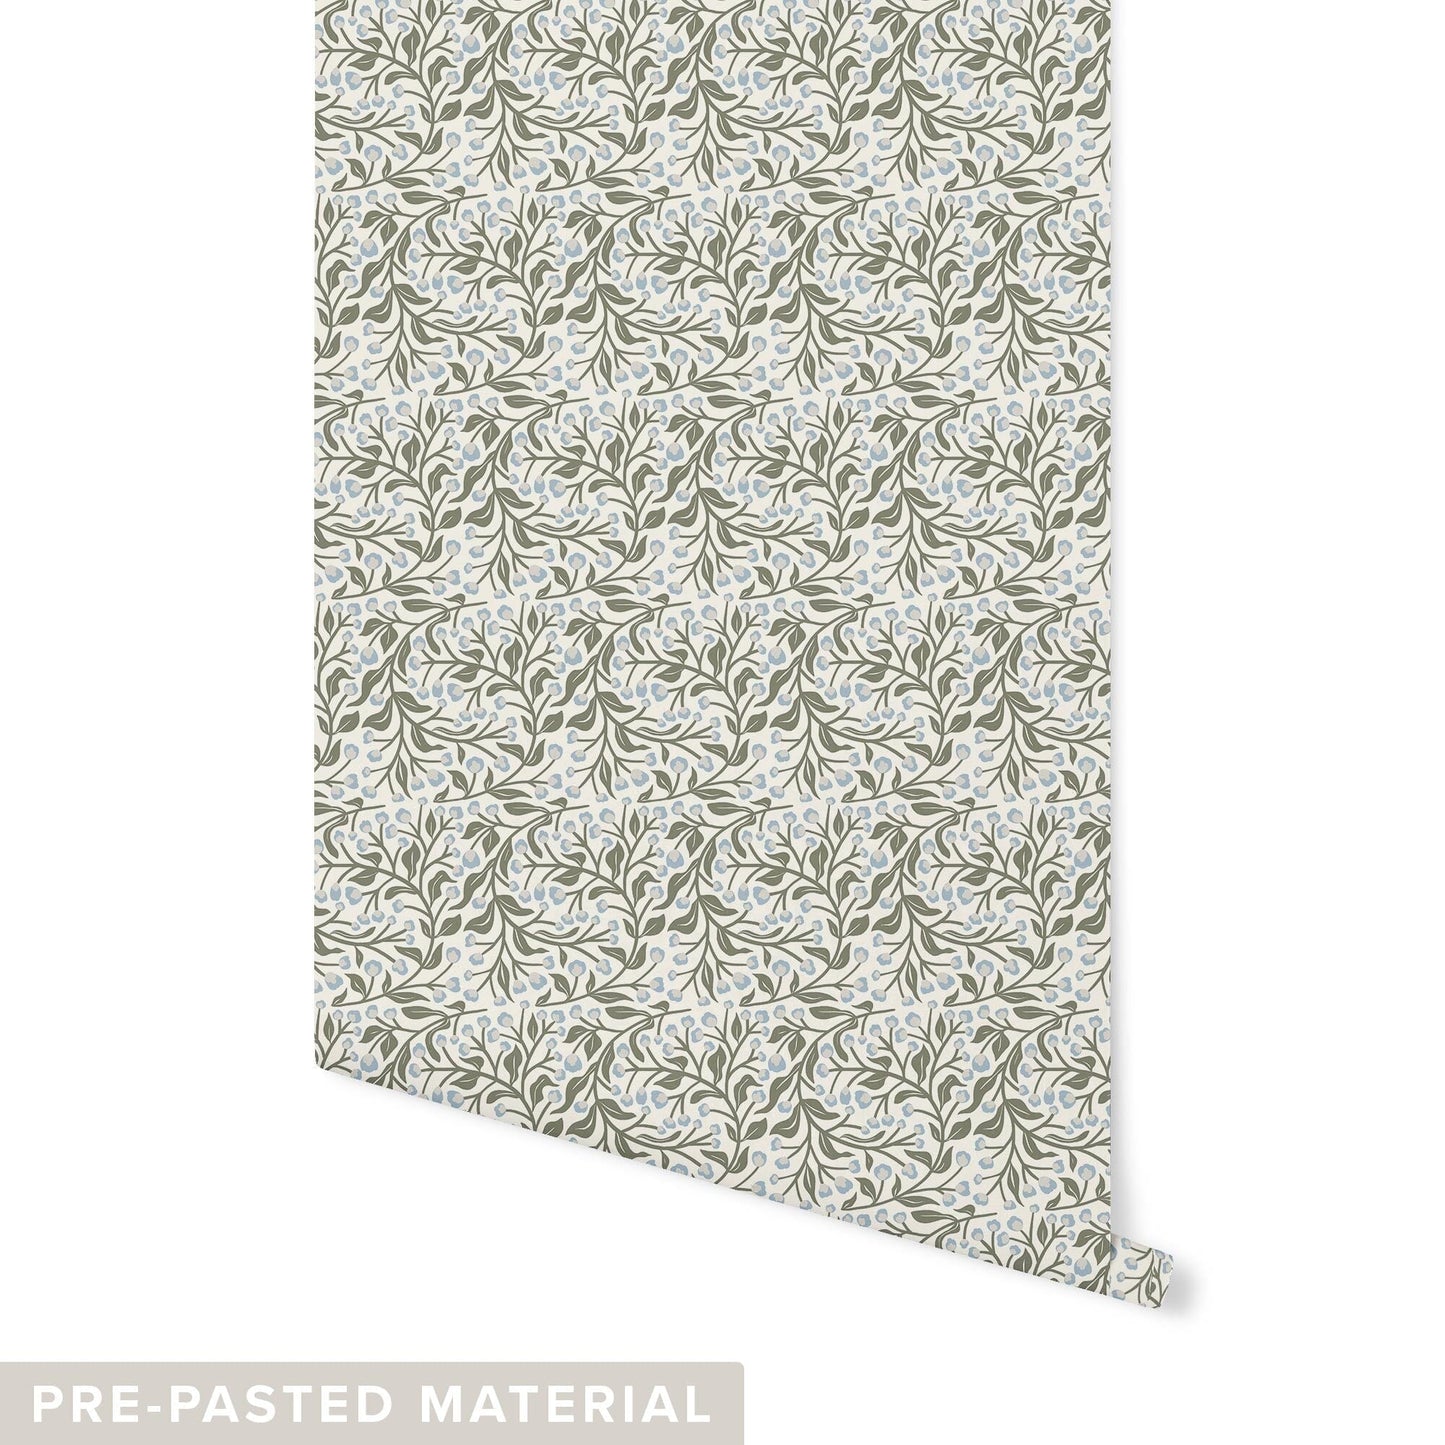 Floral Vine Wallpaper Wallpaper Urbanwalls Pre-pasted Blue & White DOUBLE ROLL : 46" X 4 FEET